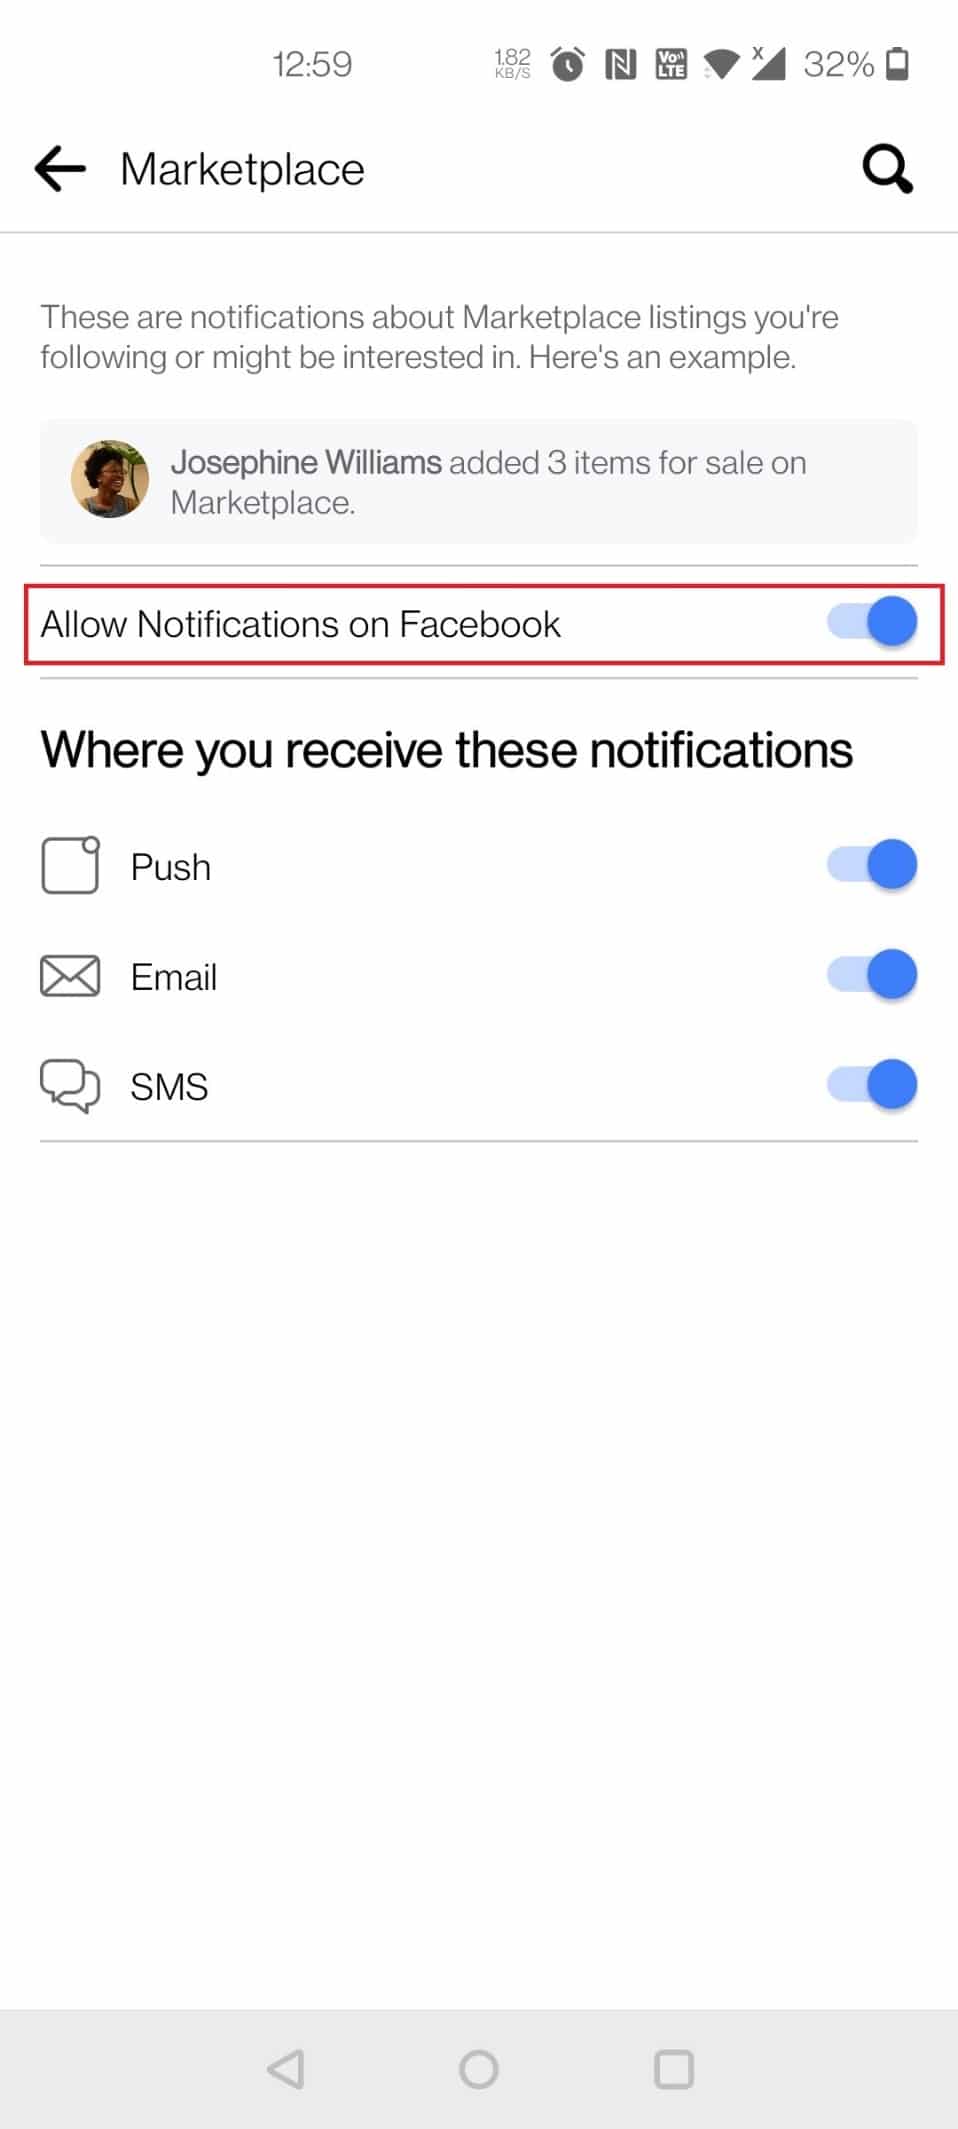 Tap Allow Notifications to block all notifications